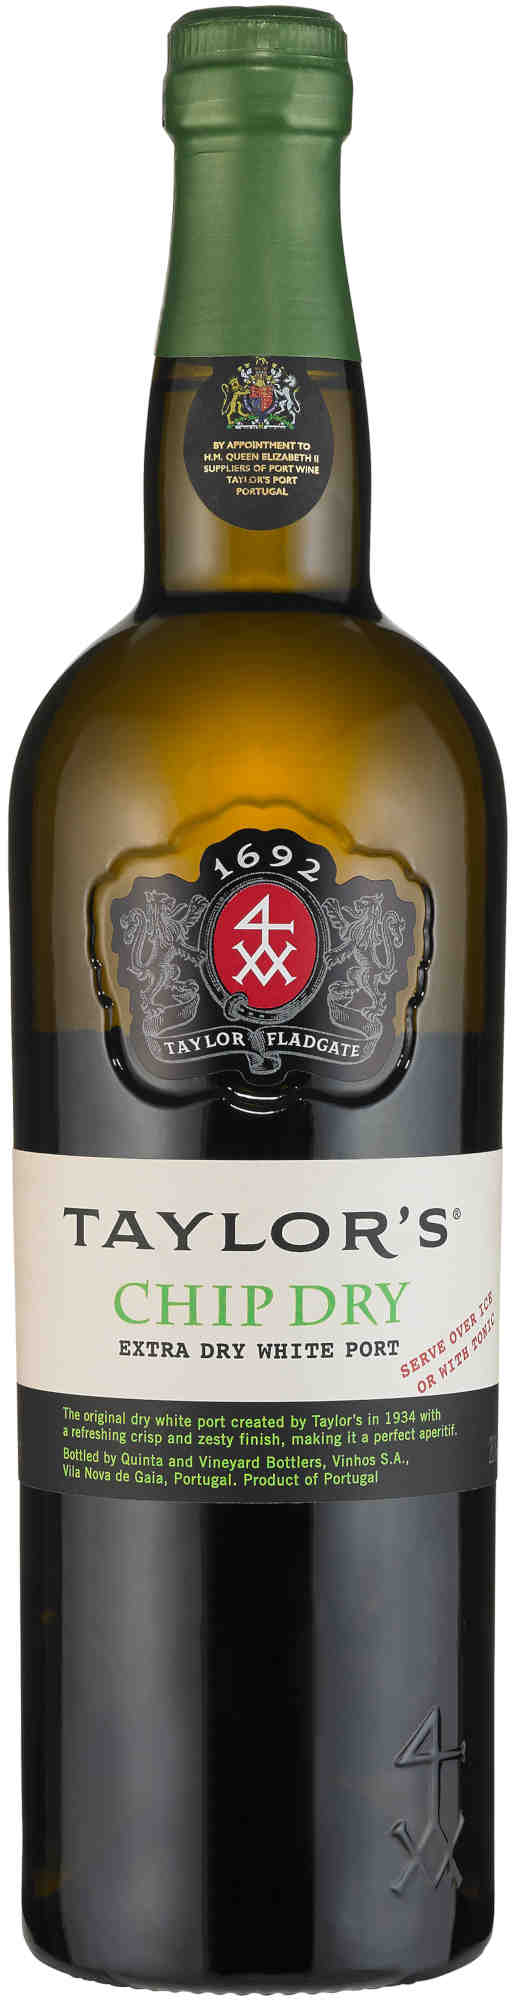 Taylors-Chip-Dry-White-Port